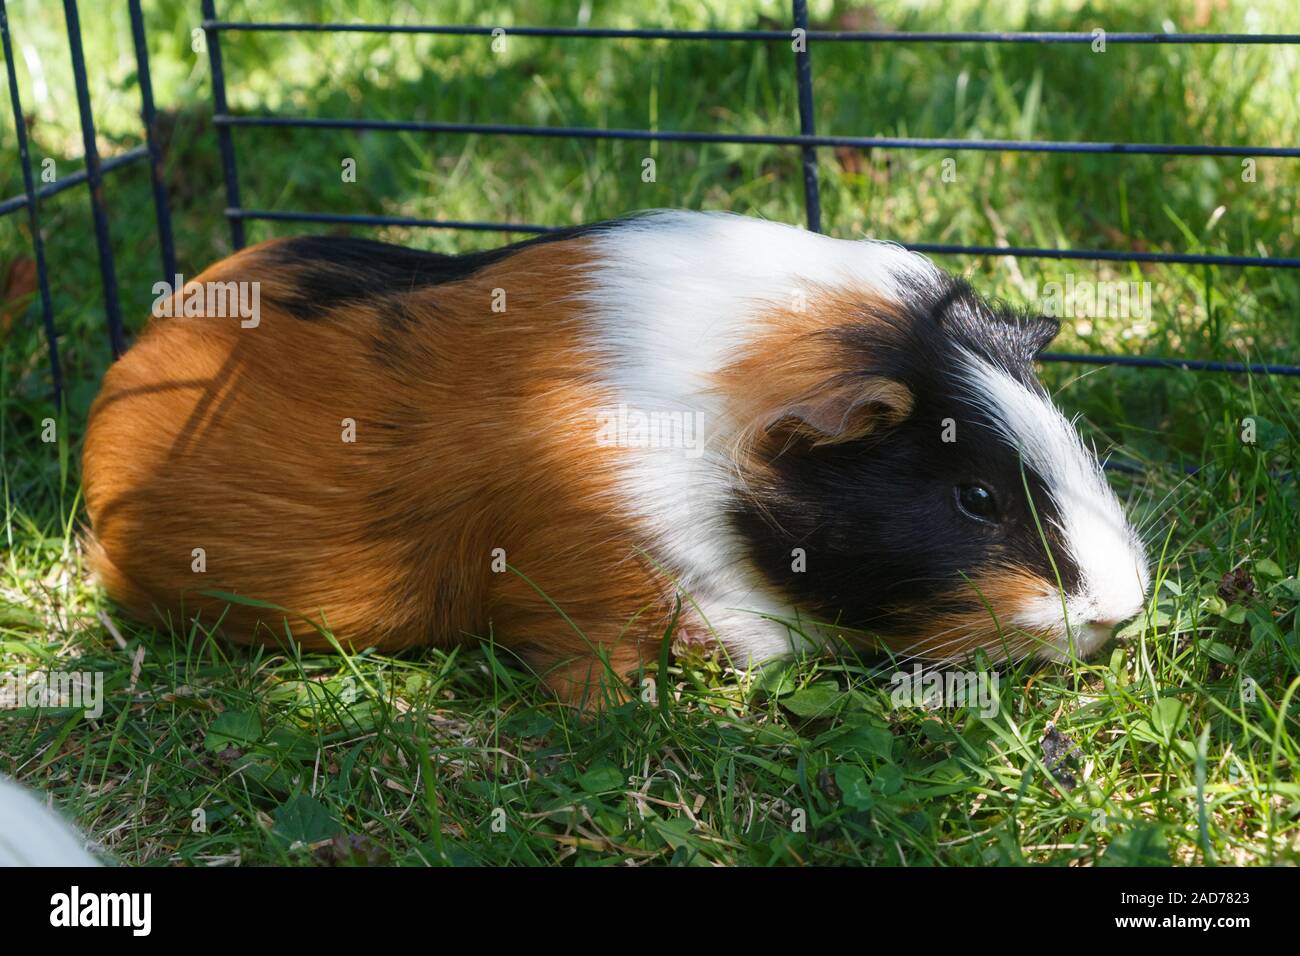 Guinea Pig Under A Wire Fencing On The Grass Of A Garden Stock